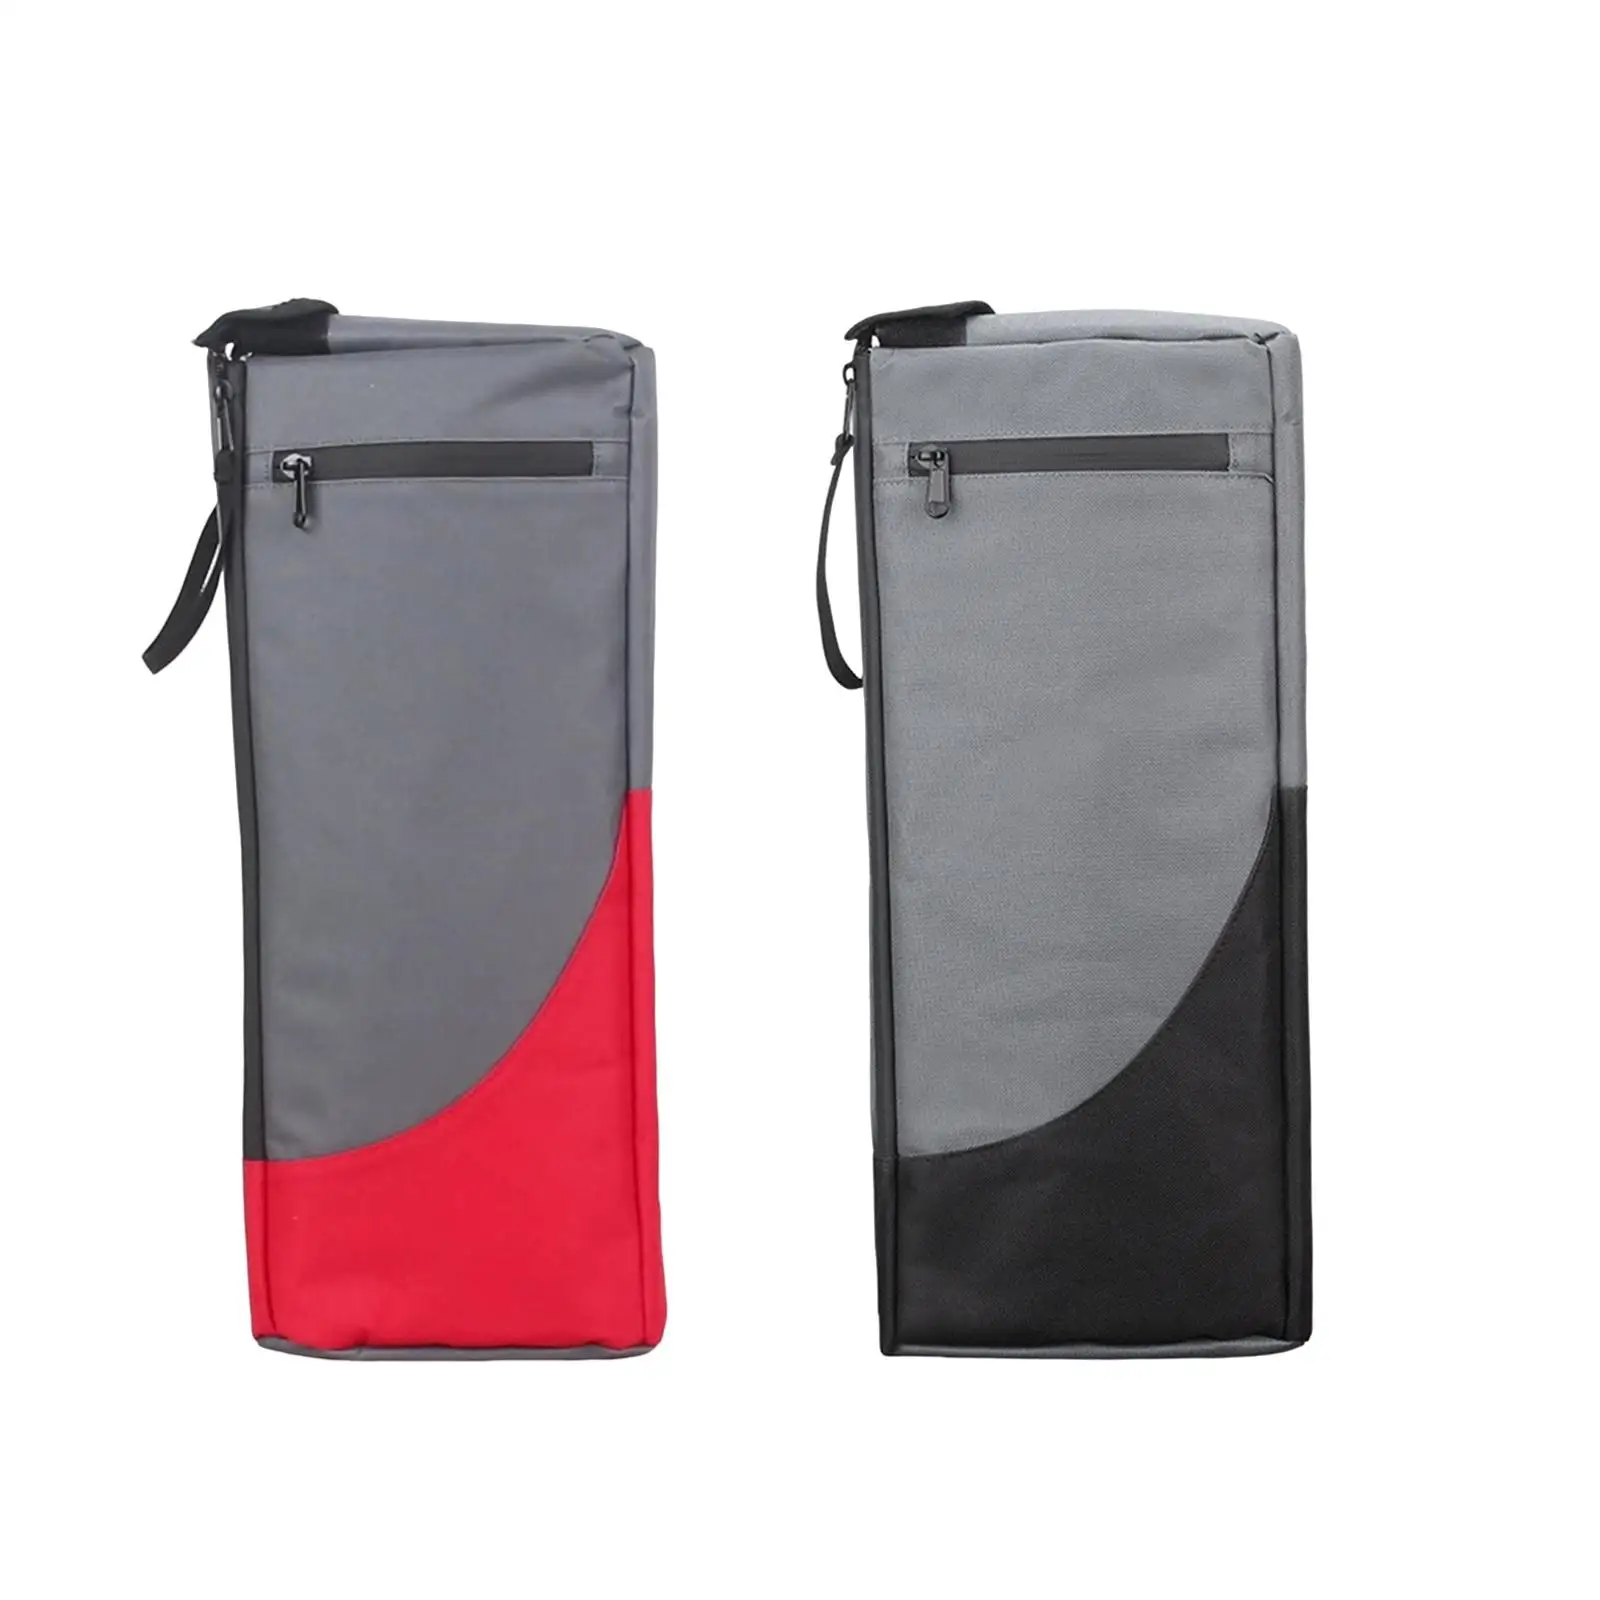 Portable Golf Cooler Bag Camping Food Traveling Pouch Outdoor Hiking Box Carrier Thermal Insulated Bag Keeps Drinks Cool